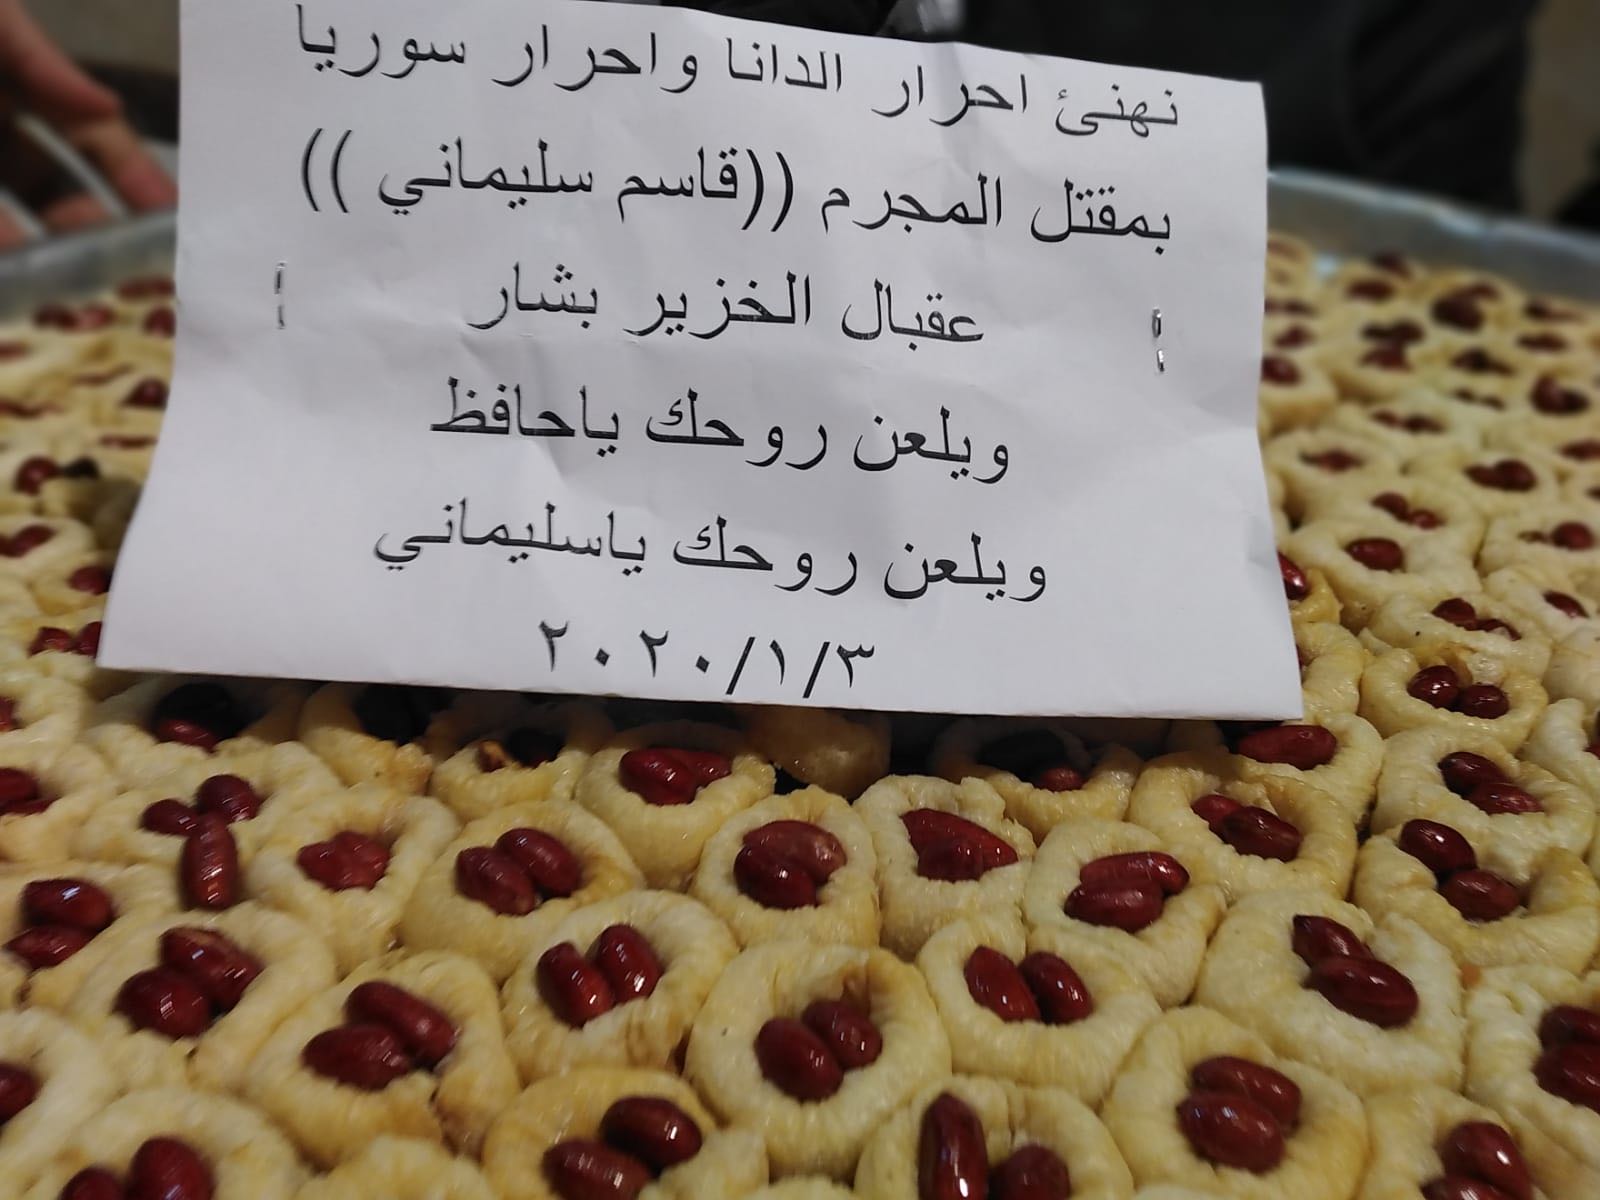 Syrians in Idlib eat sweets to celebrate the news of Qassem Soleimani's death